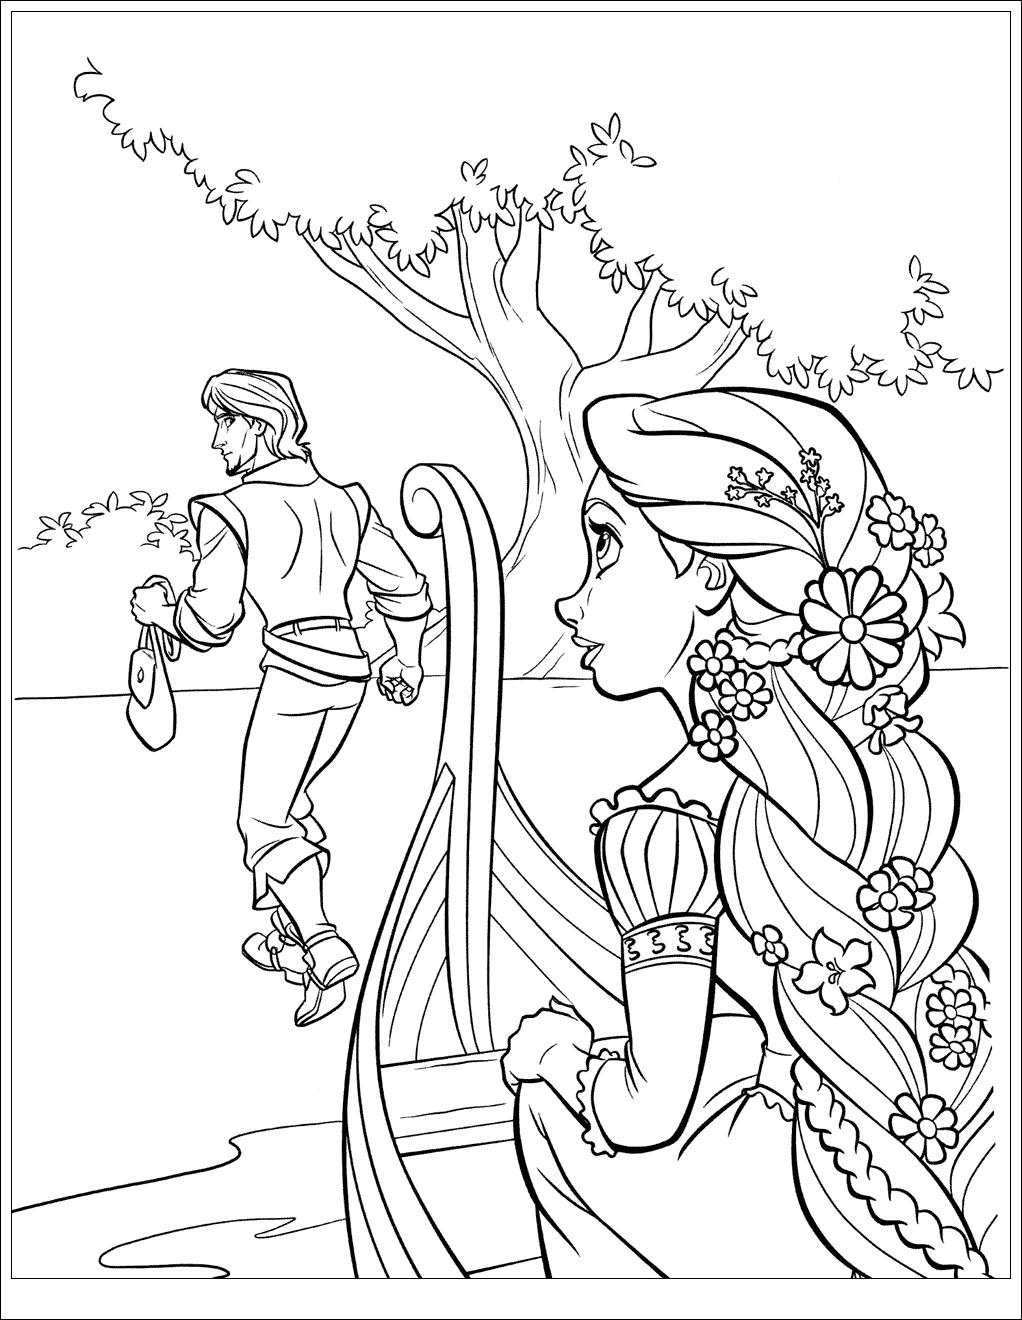 Tangled To Color For Children Tangled Kids Coloring Pages